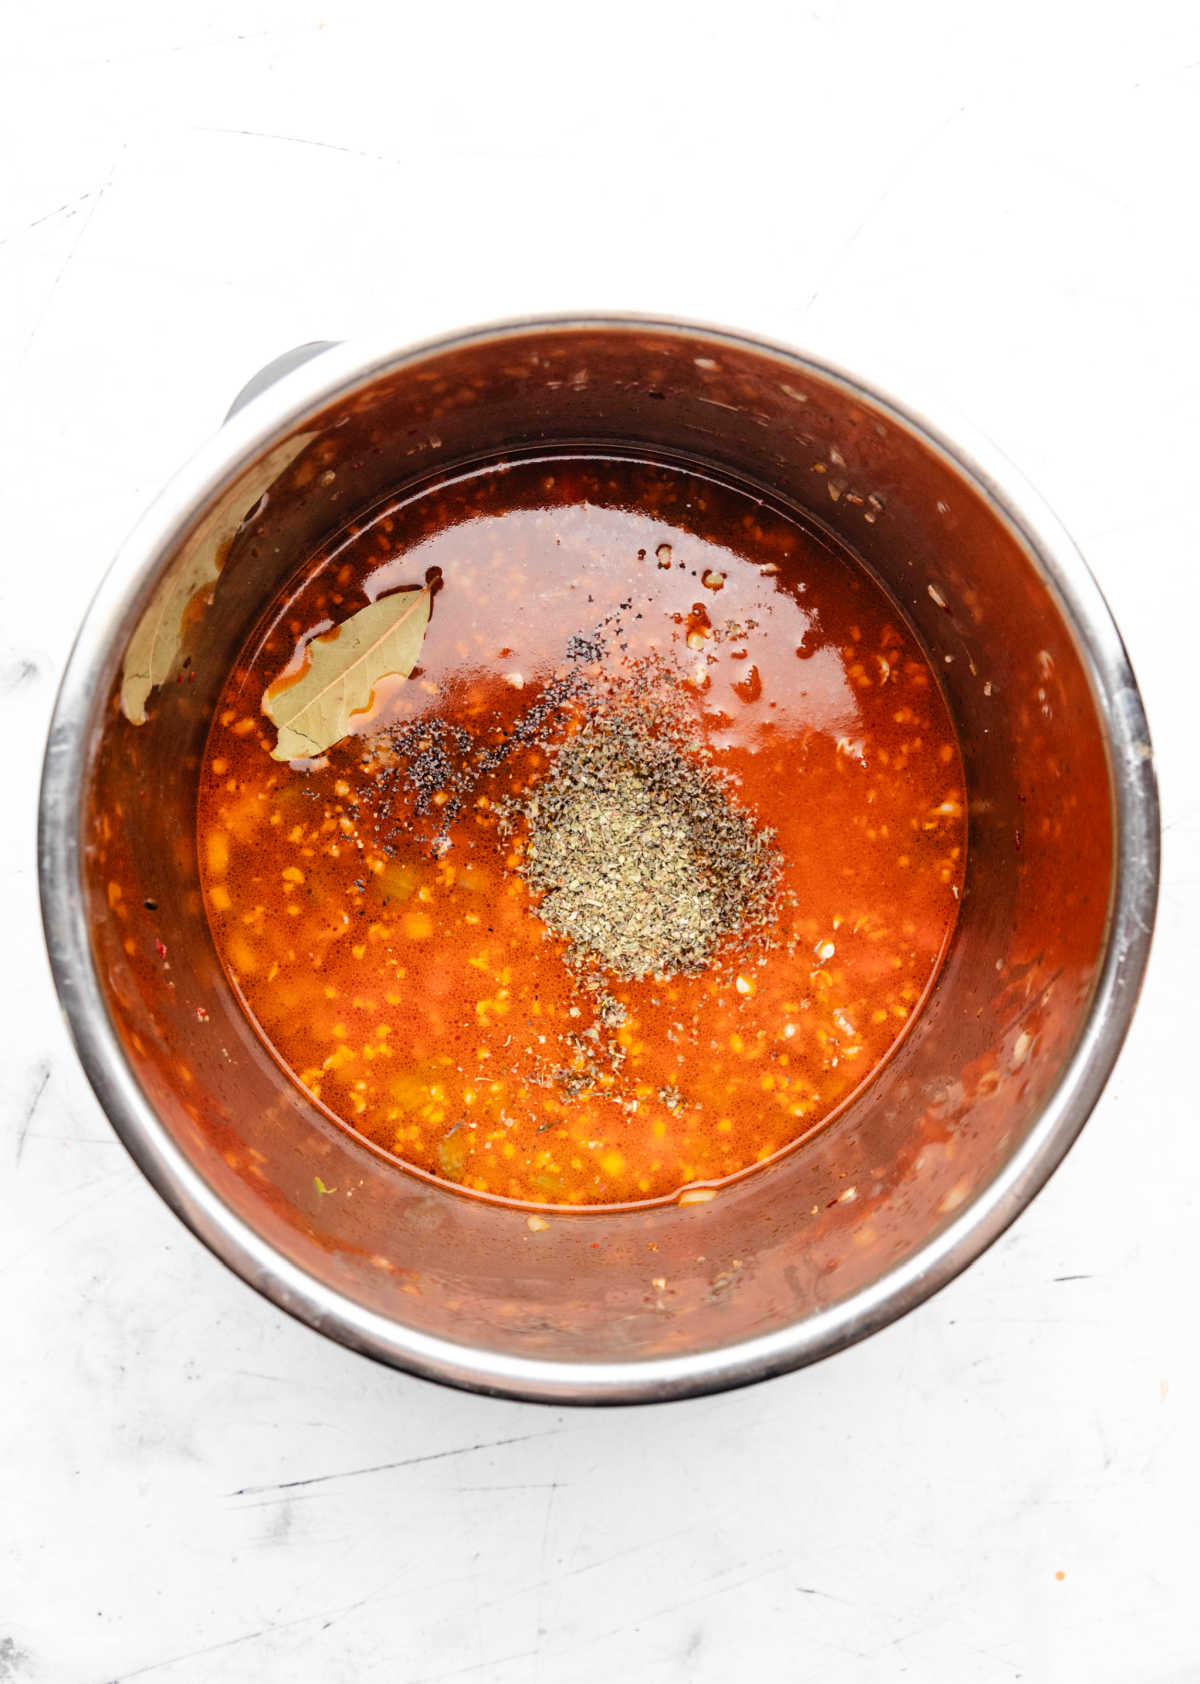 Lentils seasonings and broth mixture in an Instant Pot.